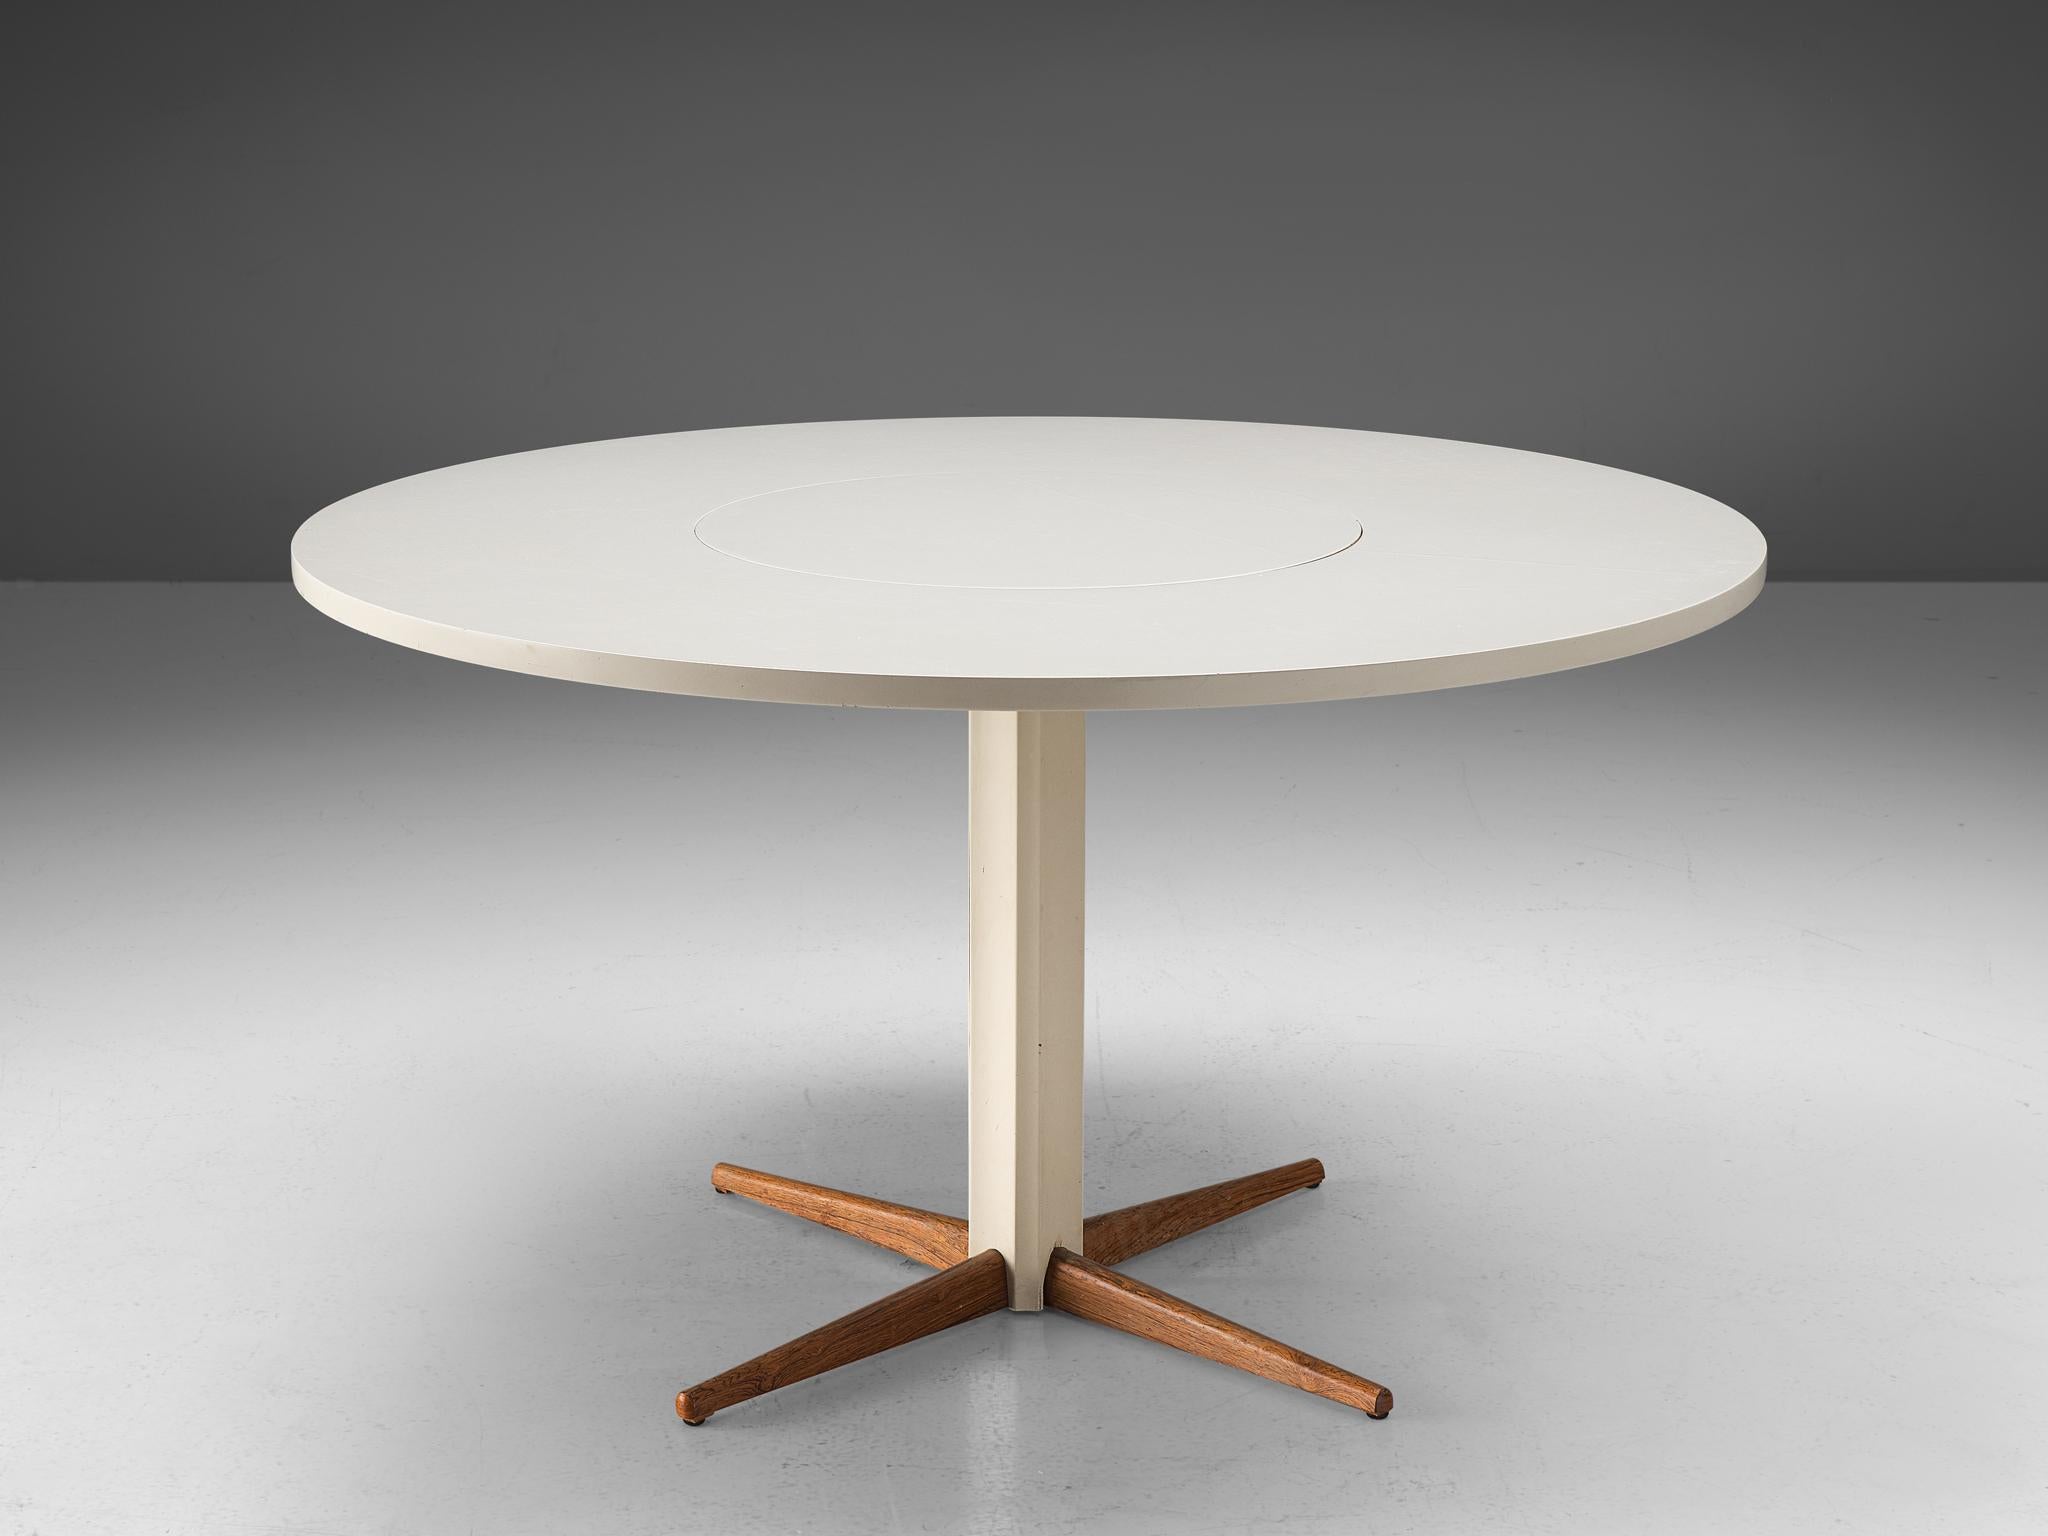 Nanna Ditzel for Kolds Savvaerk, pedestal table, wood, Denmark, 1950s

This elegant table has a slim base, well made with four tapered legs in solid wood. As the rest of the table is laquered white and the four legs show their natural wooden